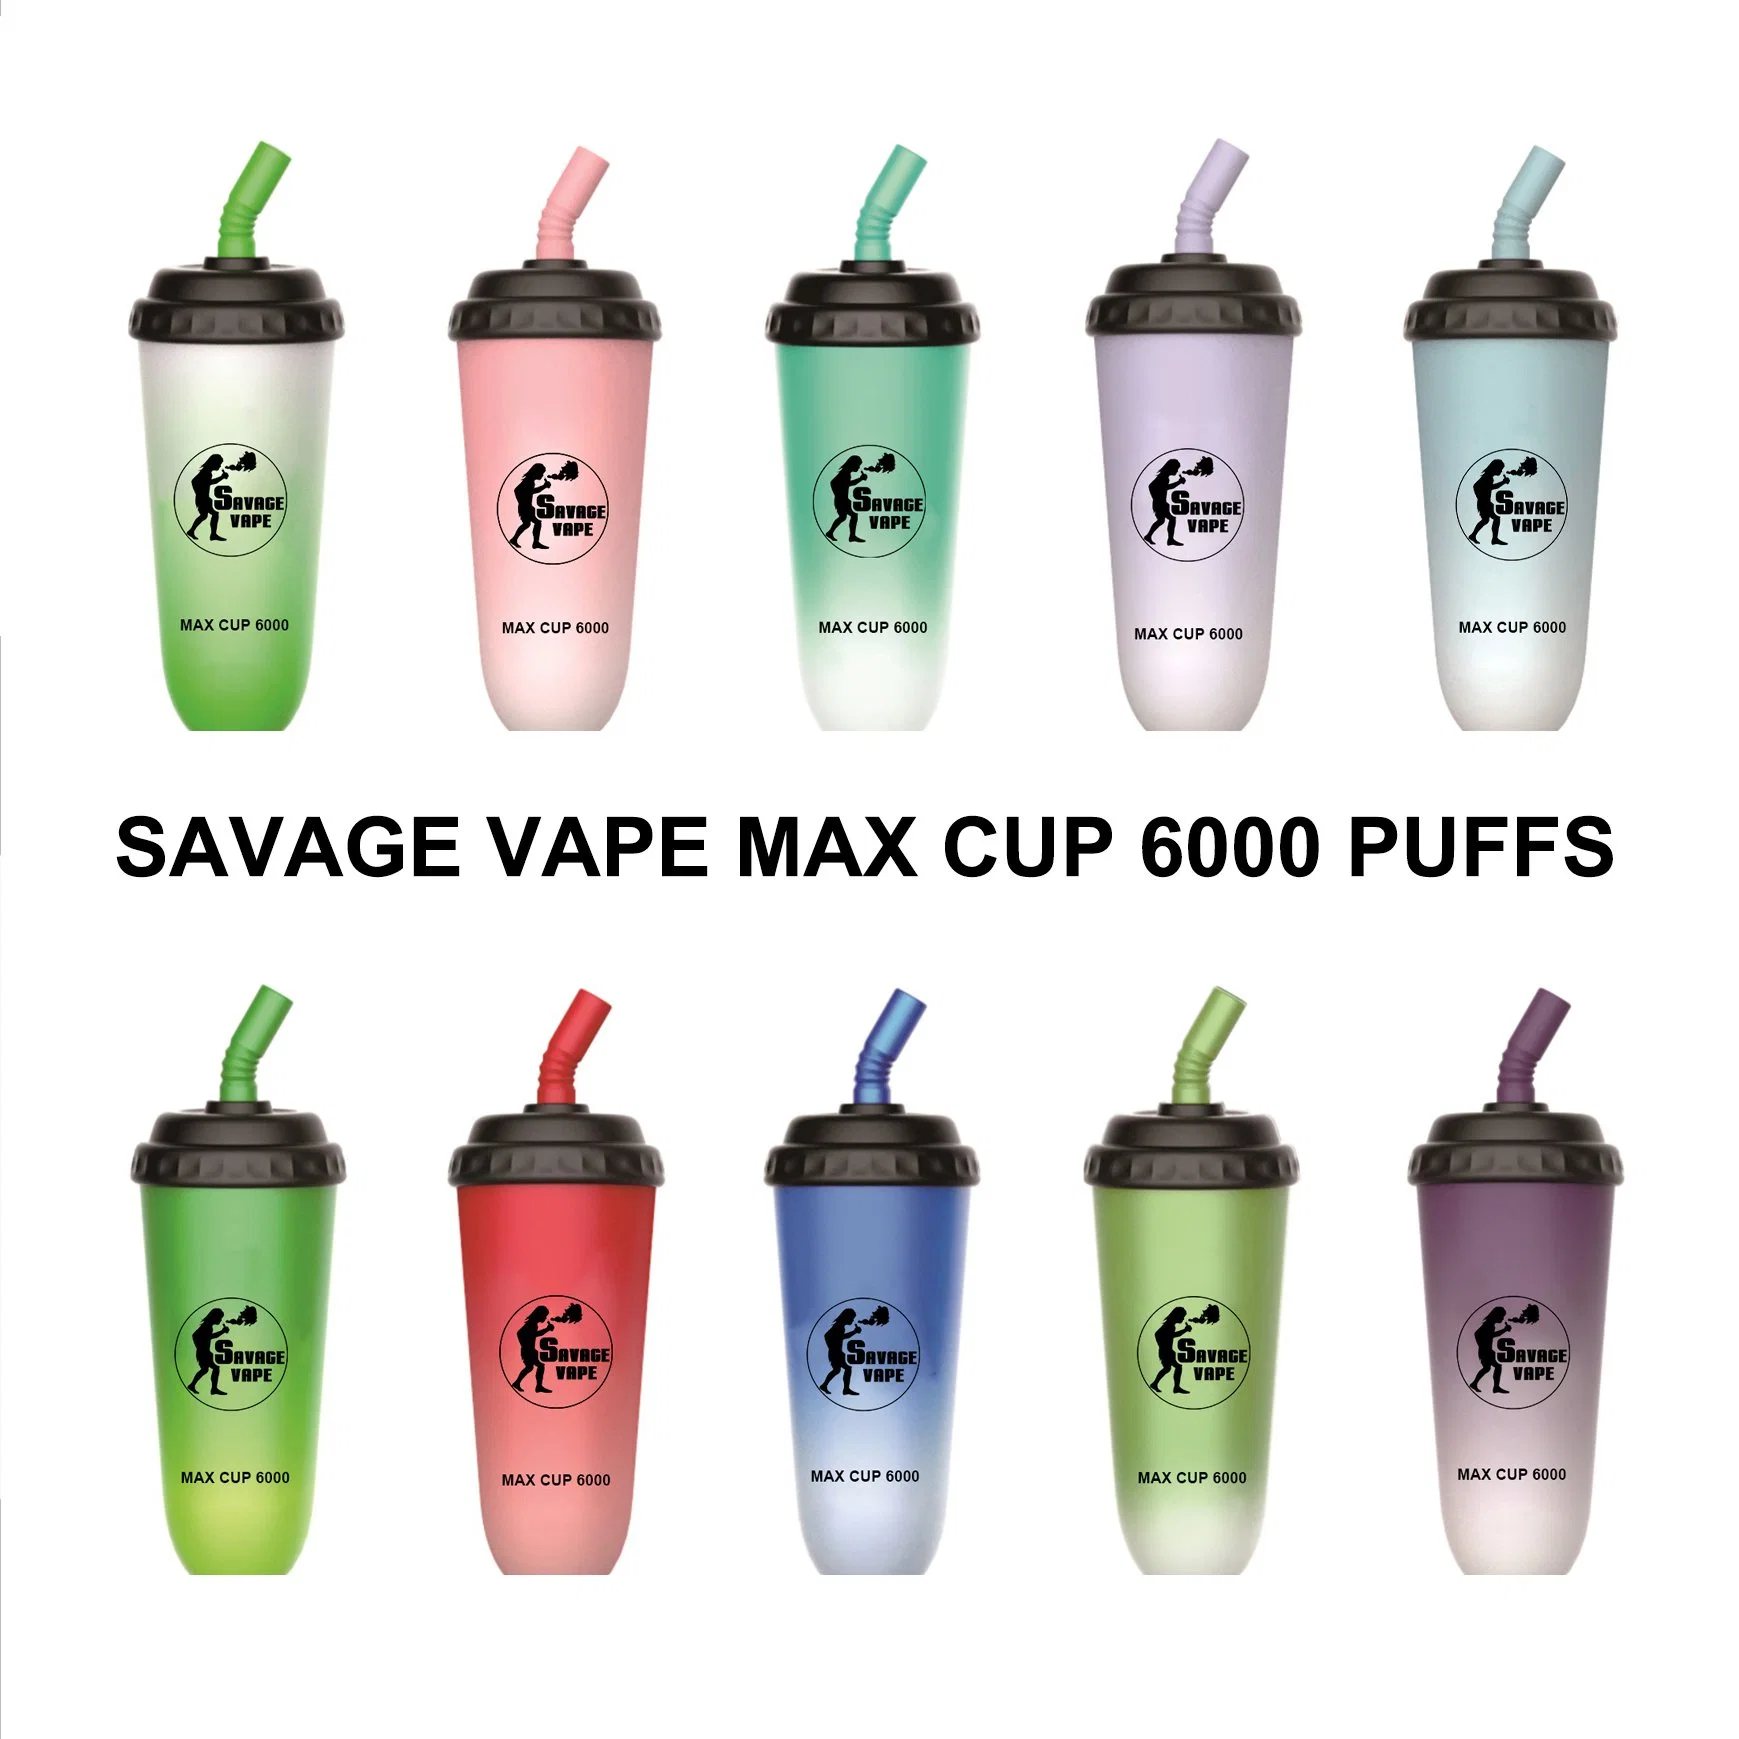 Original Savage Vape Max Cup 6000 Puffs Disposable Vapes Puff 7K E Cigarette Puff 8000 Prefilled Carts Zooy Apex 5000 Hits Rechargeable Battery 5% Randm Tornad